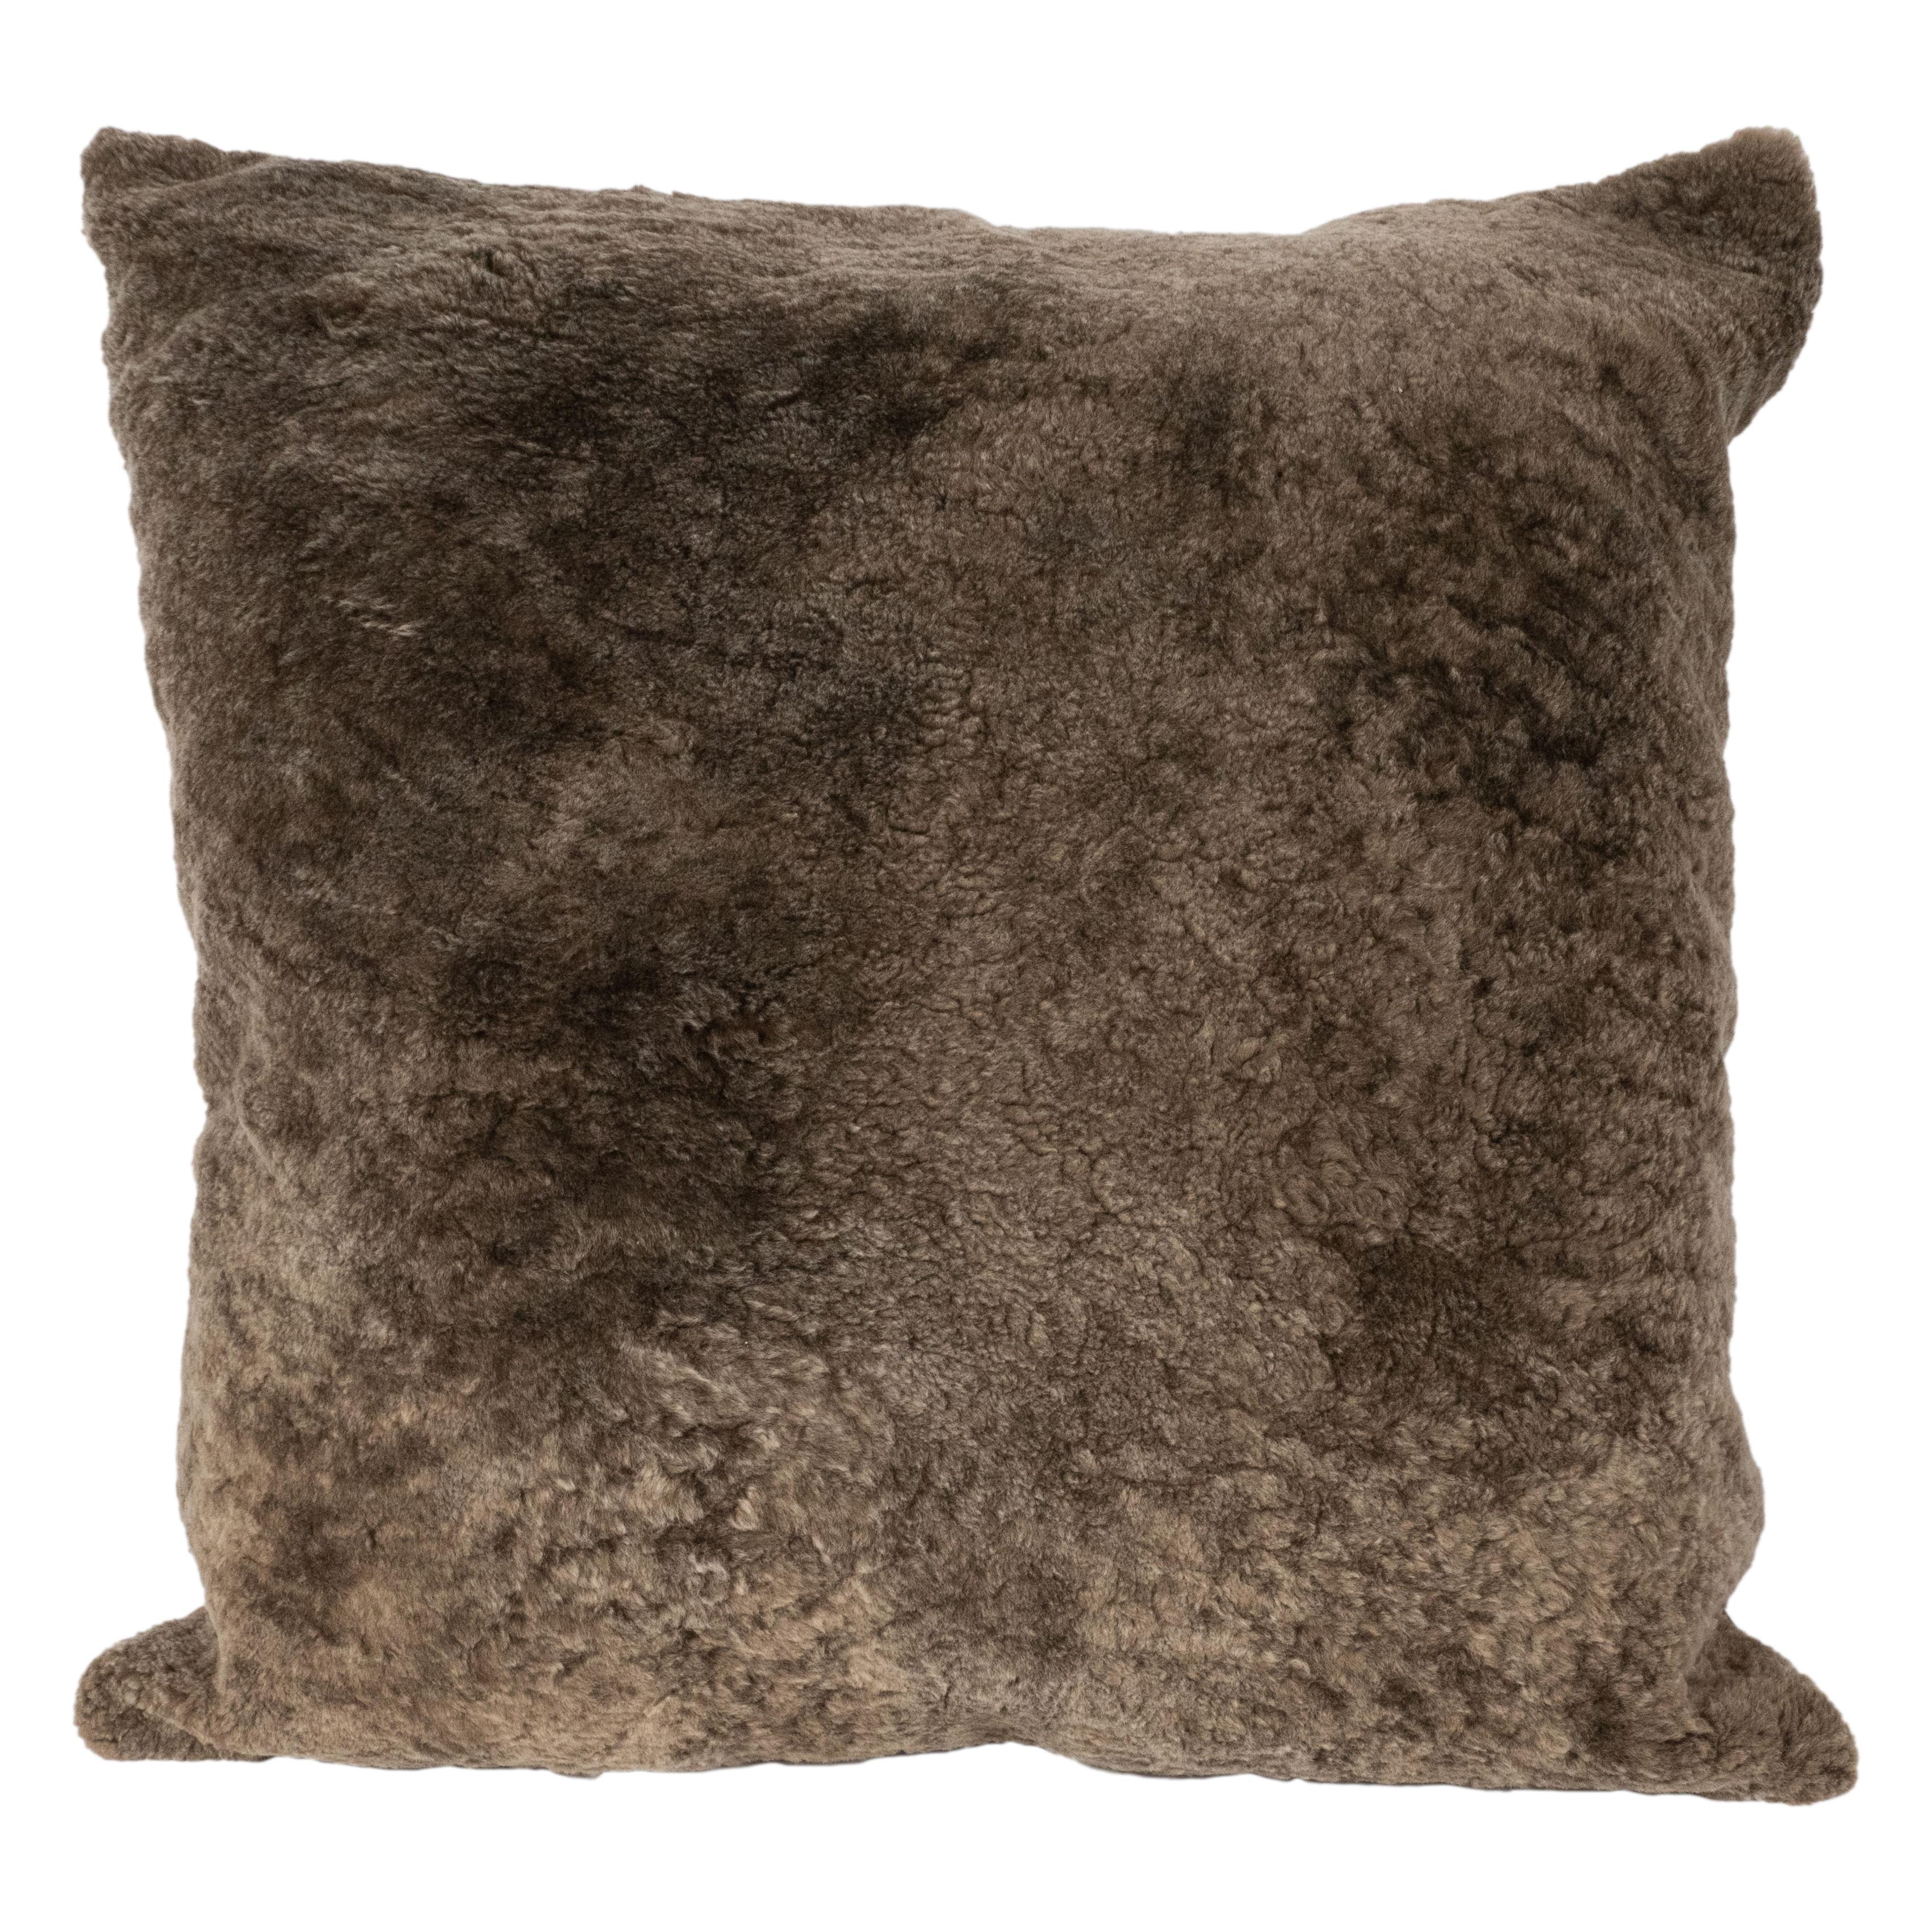 This beautiful and luxurious modernist square pillow was realized in Italy. It features a shearling front in slate umber with tawny suede. Impeccably crafted and sumptuous, this pillow would be a winning addition to any interior, and feels just as